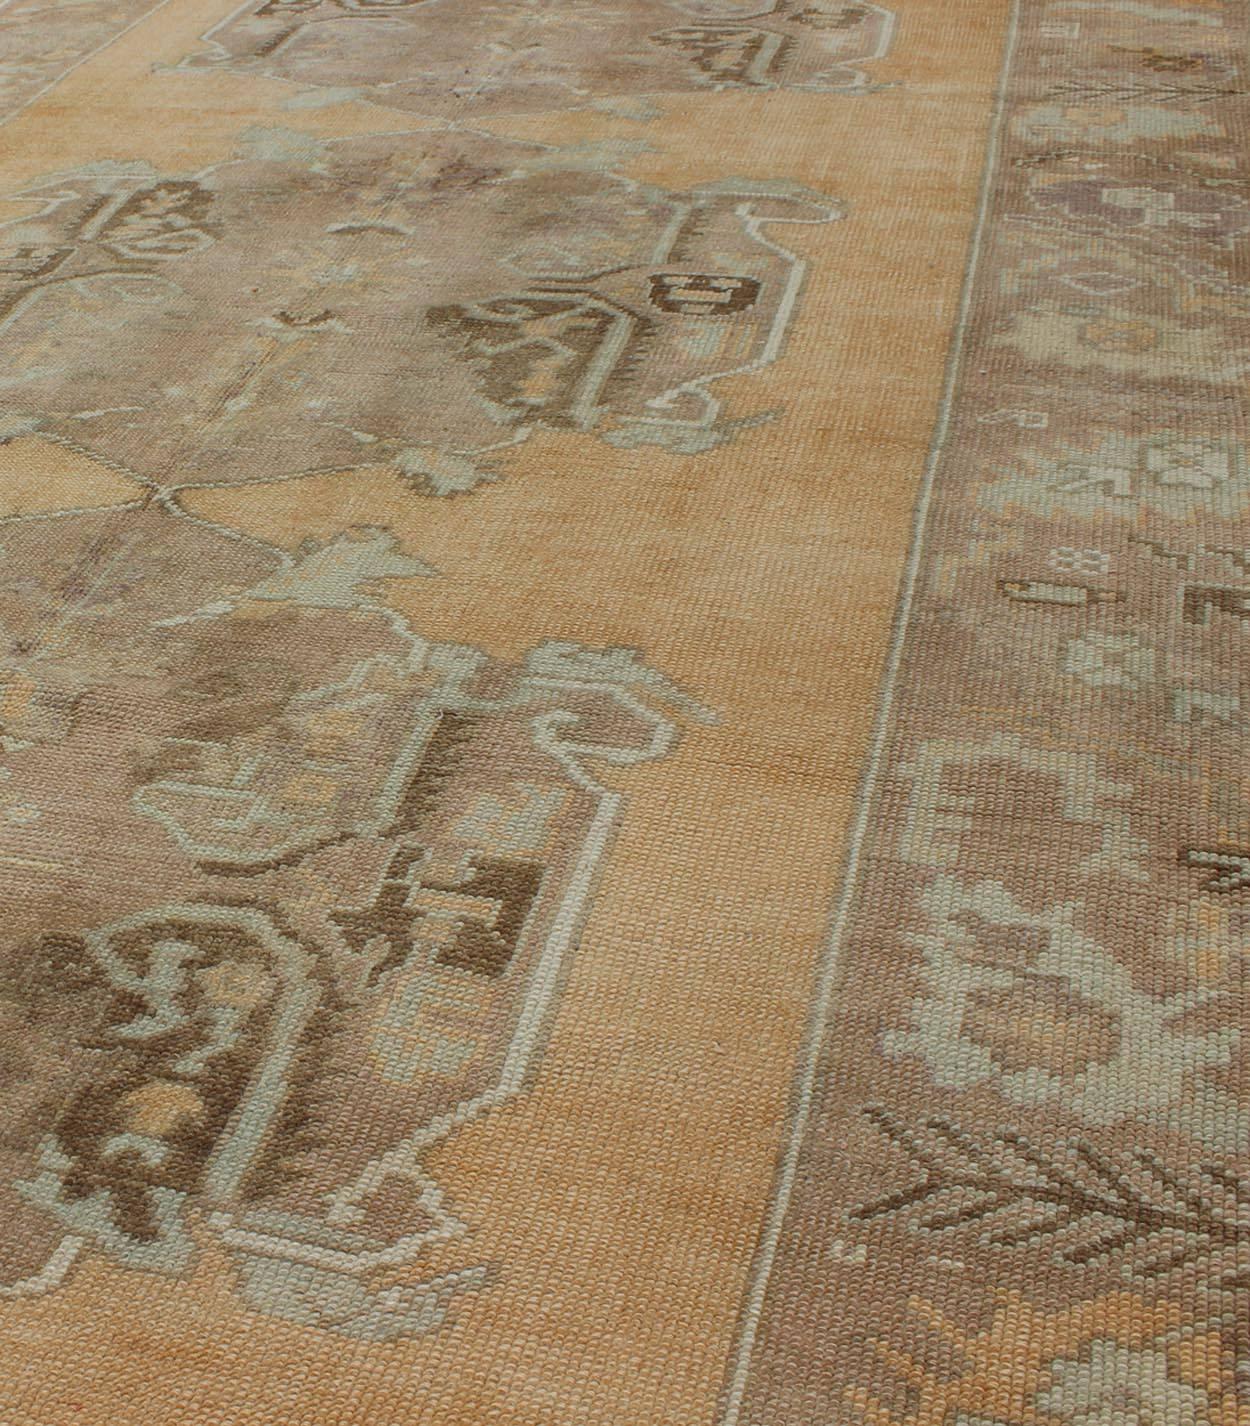 Vintage Oushak Rug with Three Central Medallions Set on Faint Sand-Colored Field In Excellent Condition For Sale In Atlanta, GA